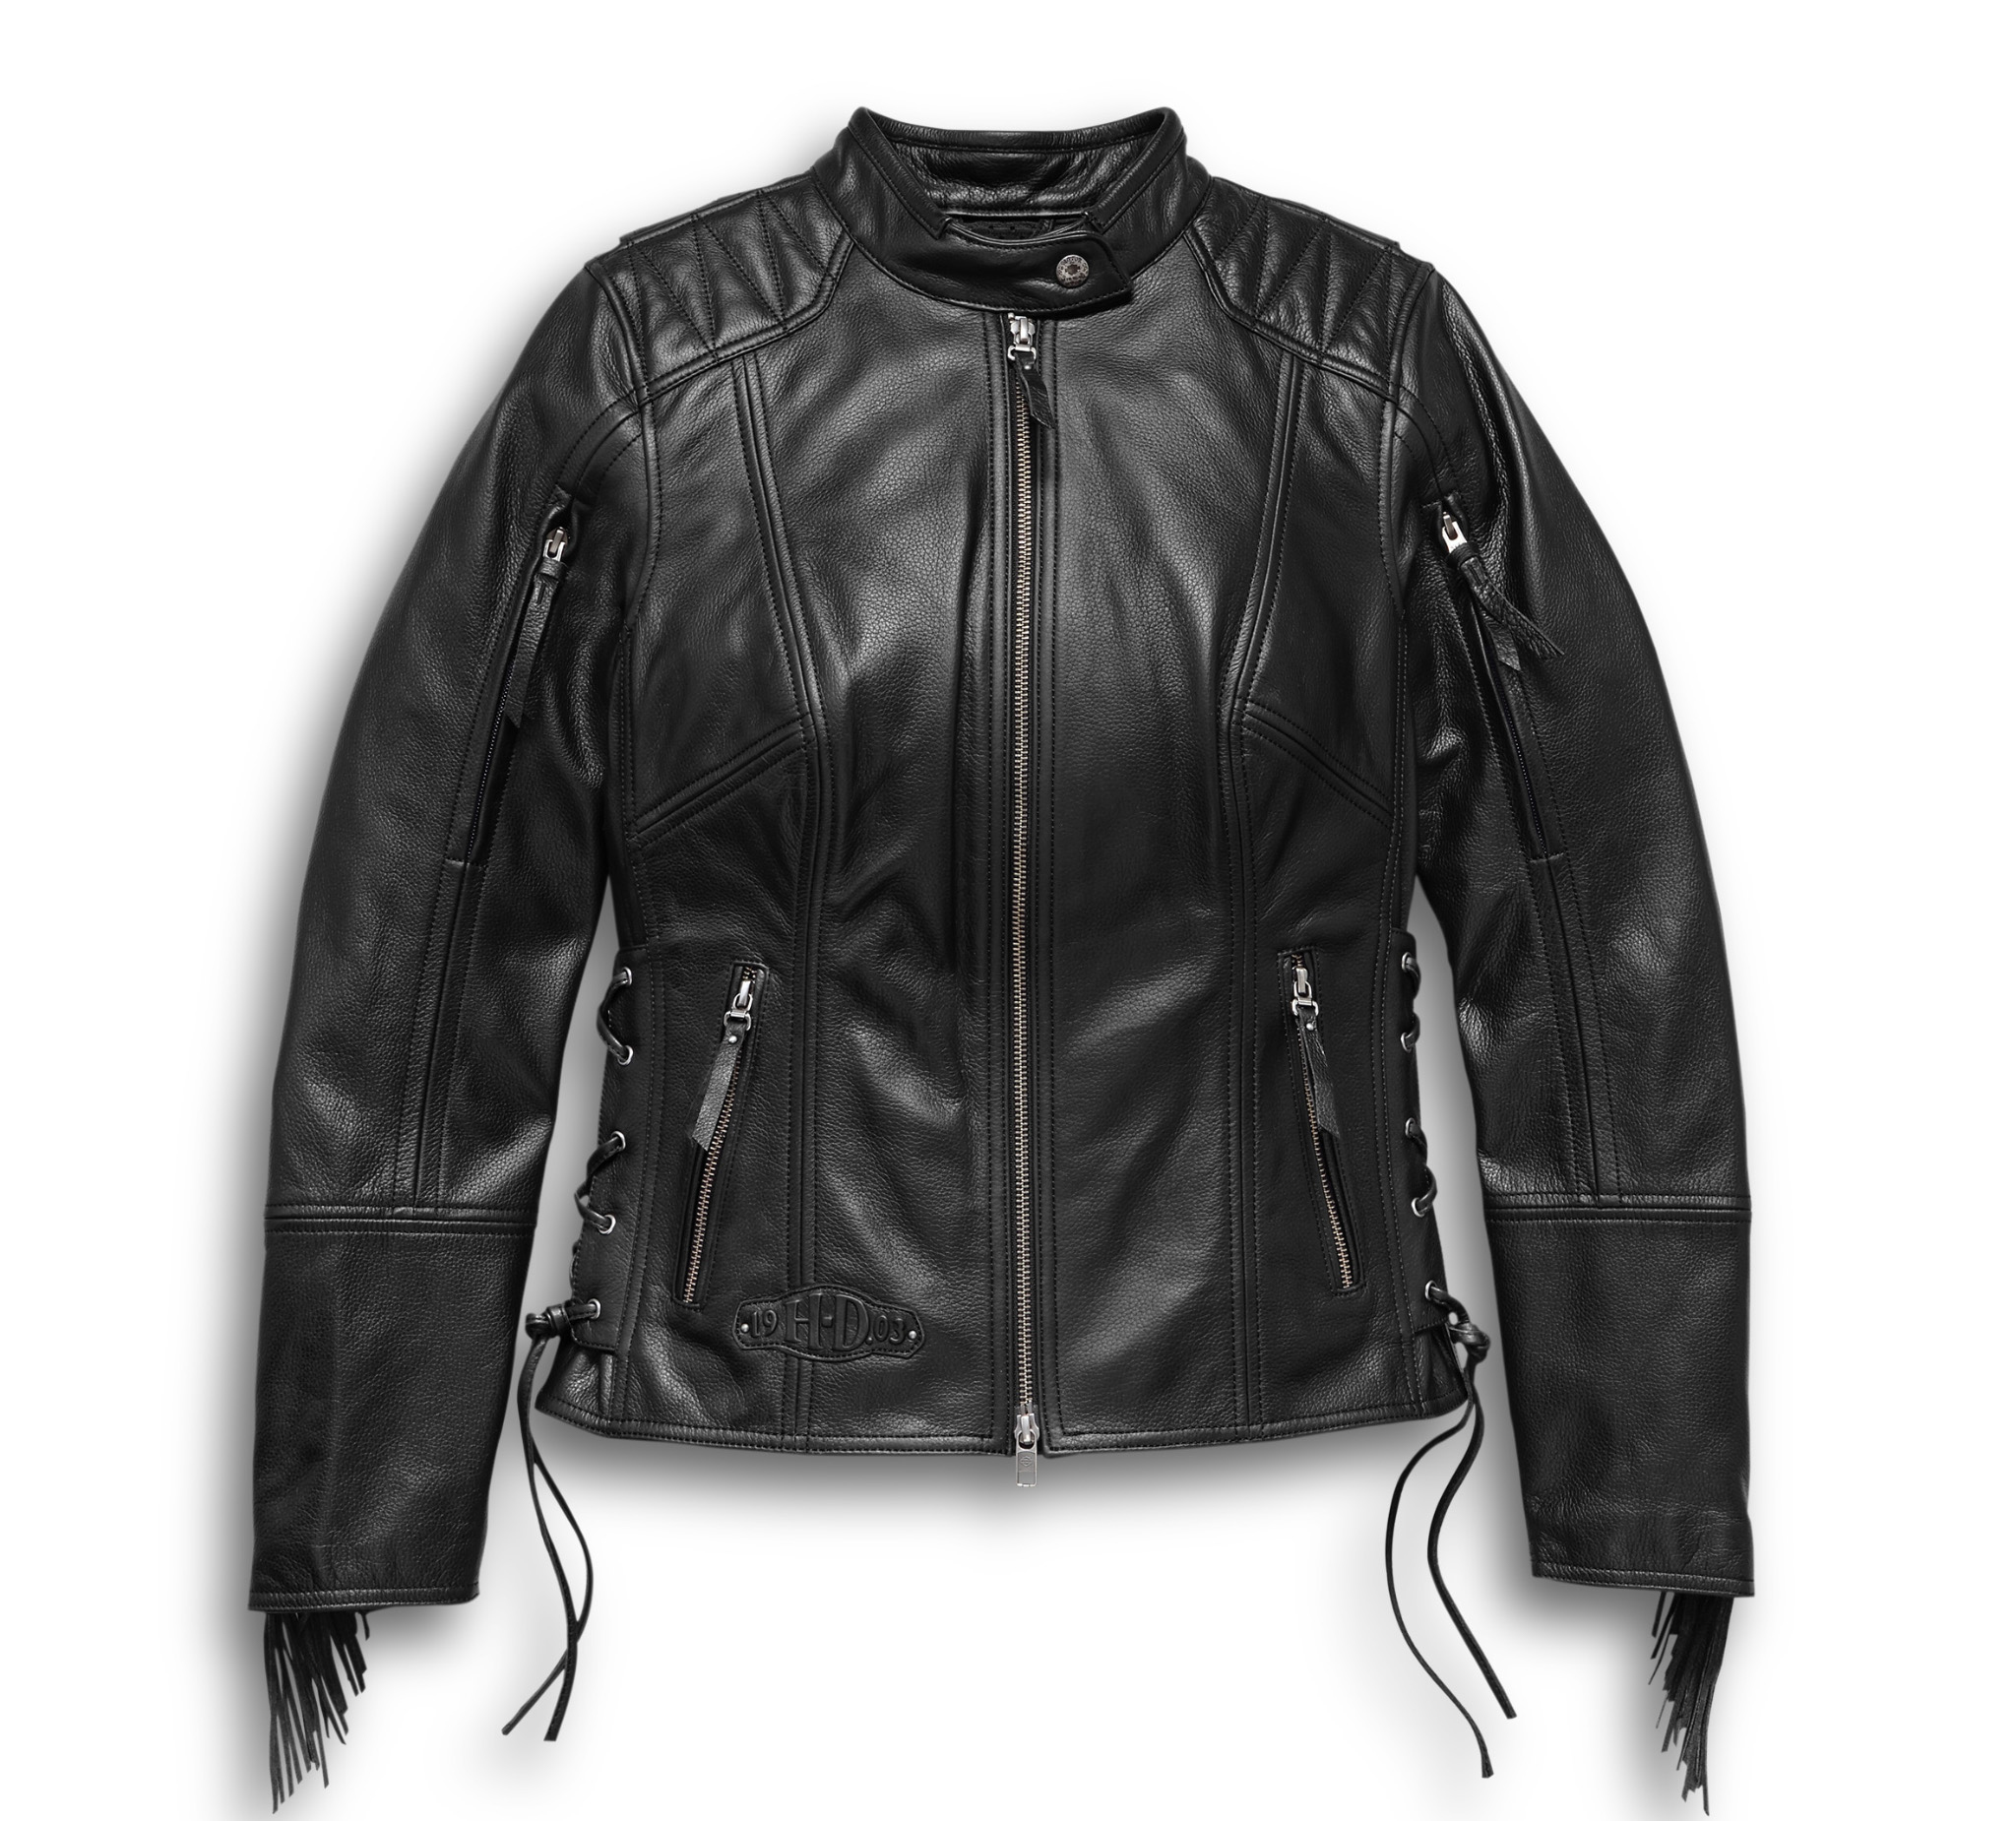 Women's Boone Fringed Leather Jacket - Tall | Harley-Davidson Africa